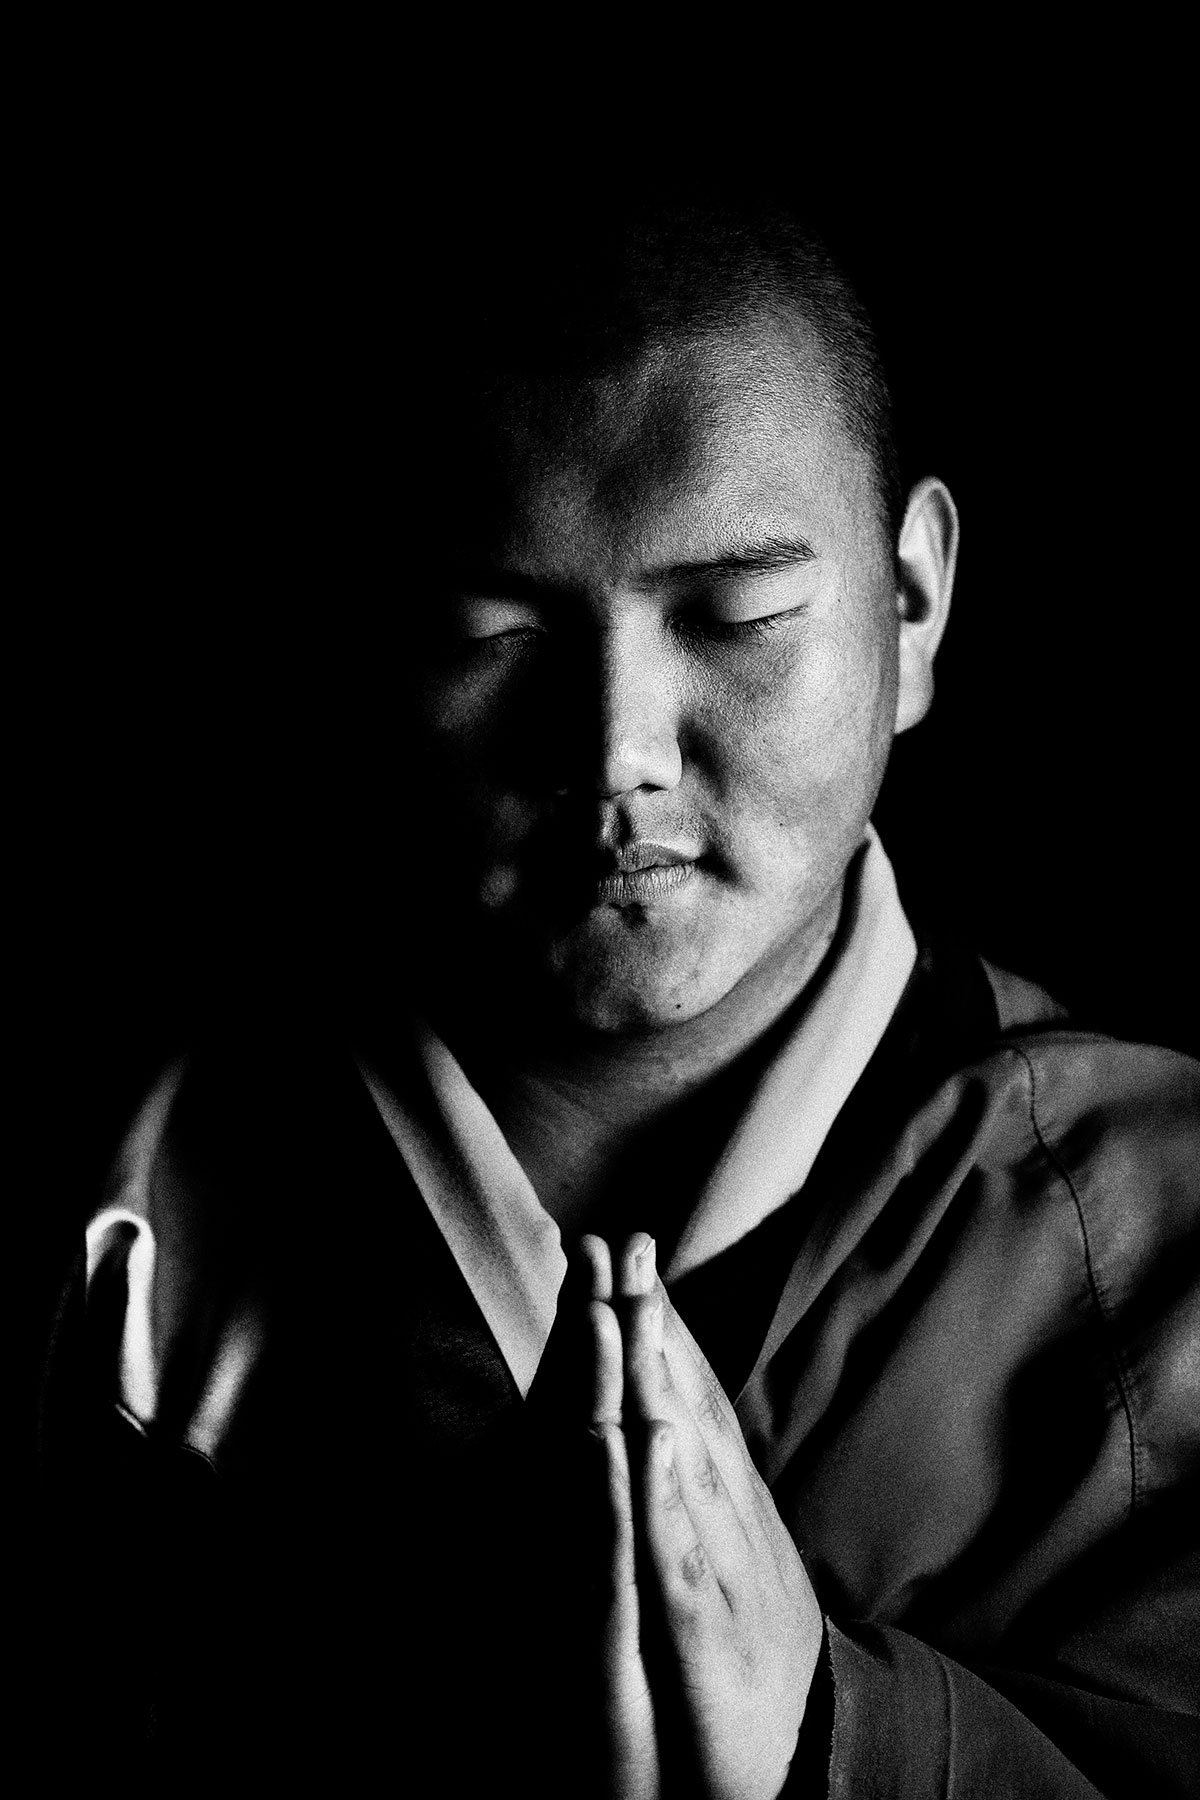 Eyes Closed Portrait of a Bhutanese Monk: Black and White Portrait Photography by Jean Tran and Élysée Lang